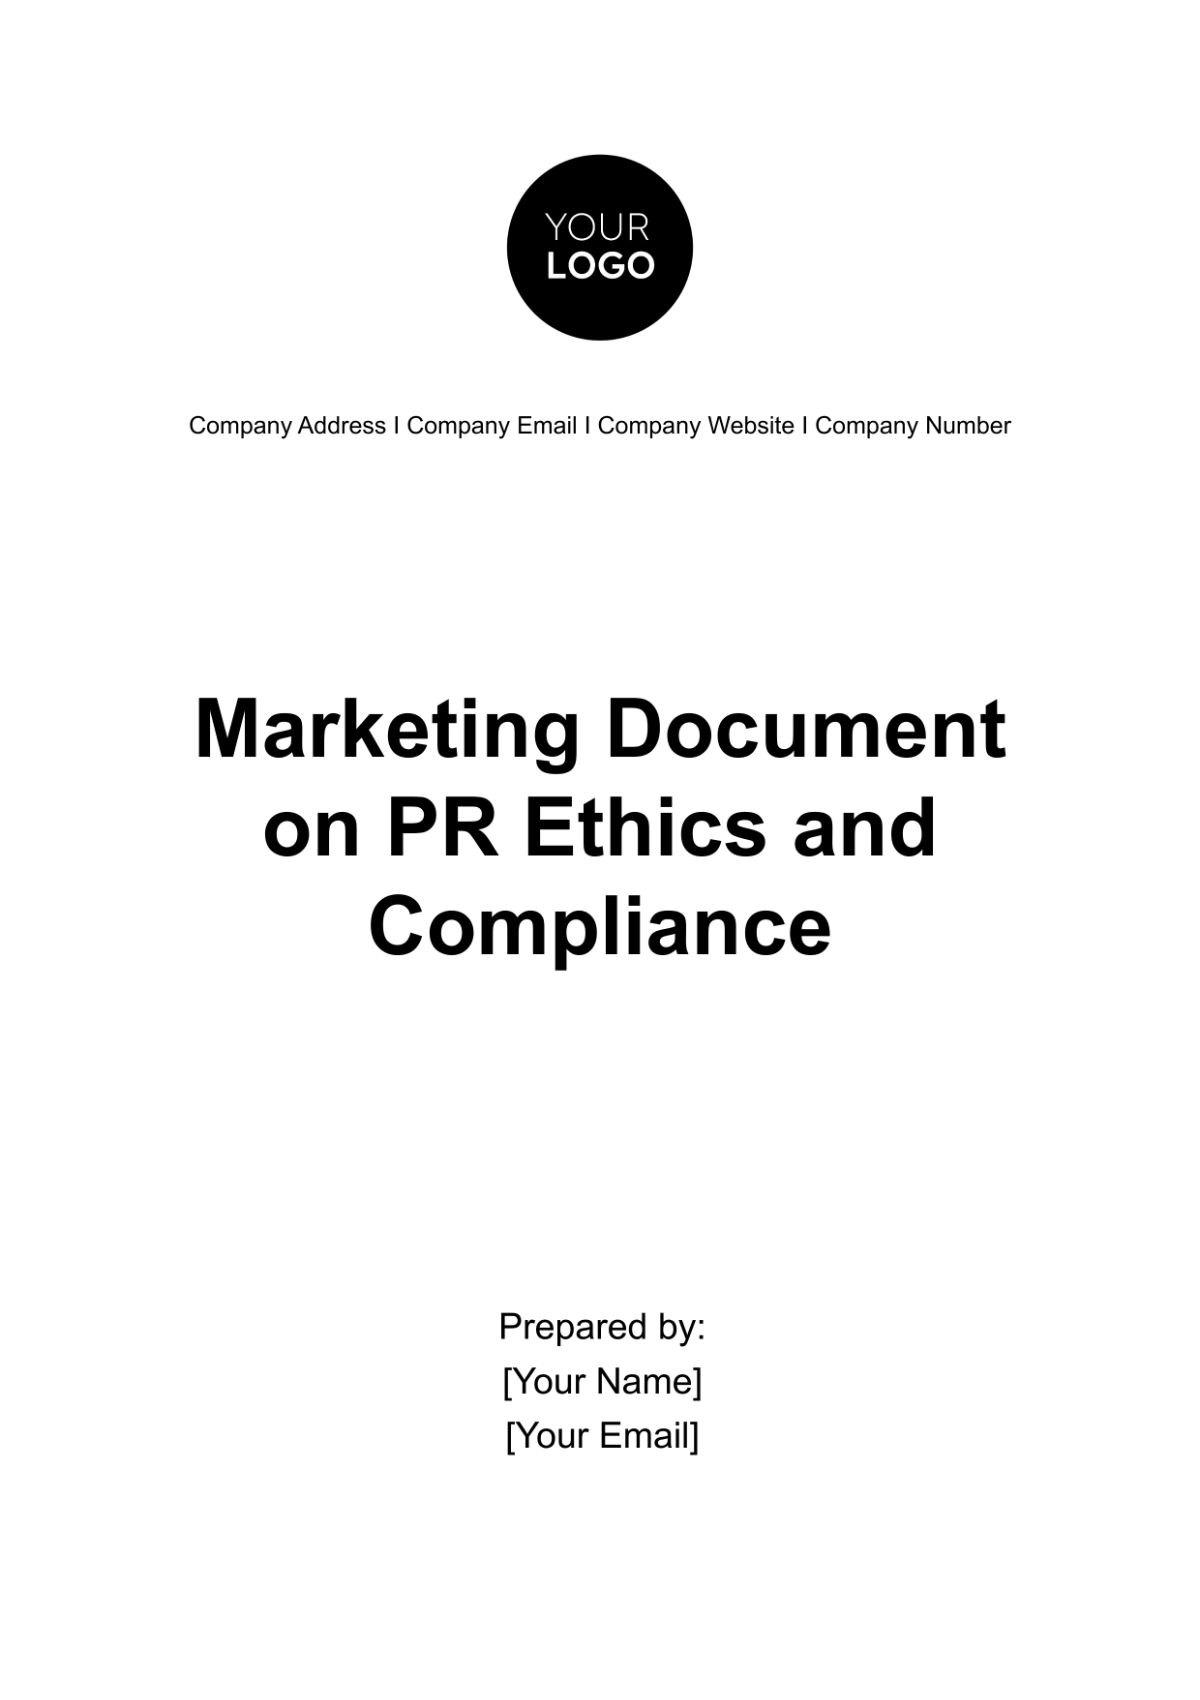 Marketing Document on PR Ethics and Compliance Template